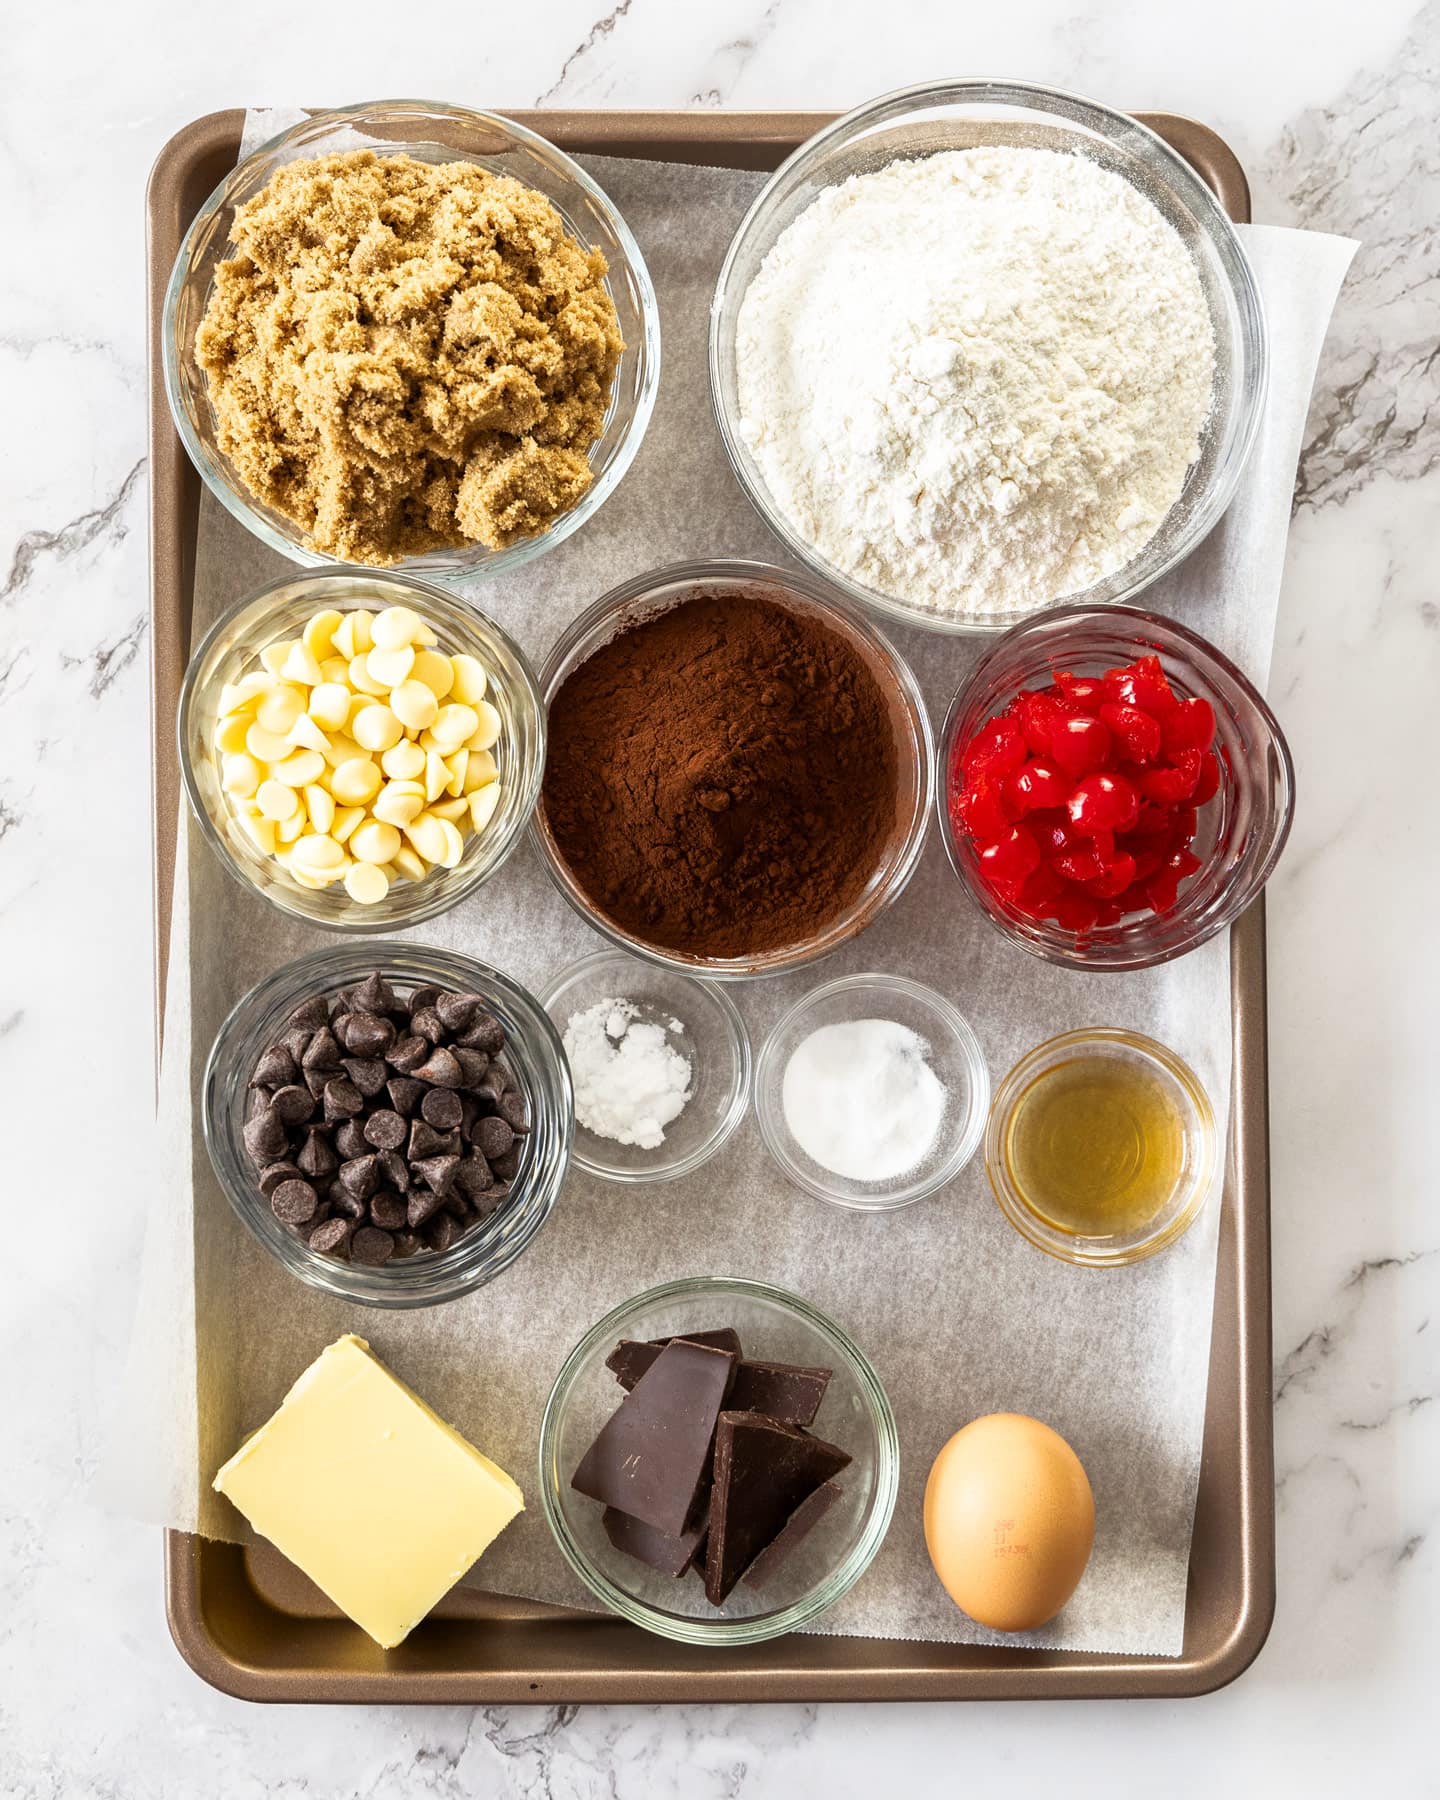 Ingredients for black forest cookies on a baking tray.